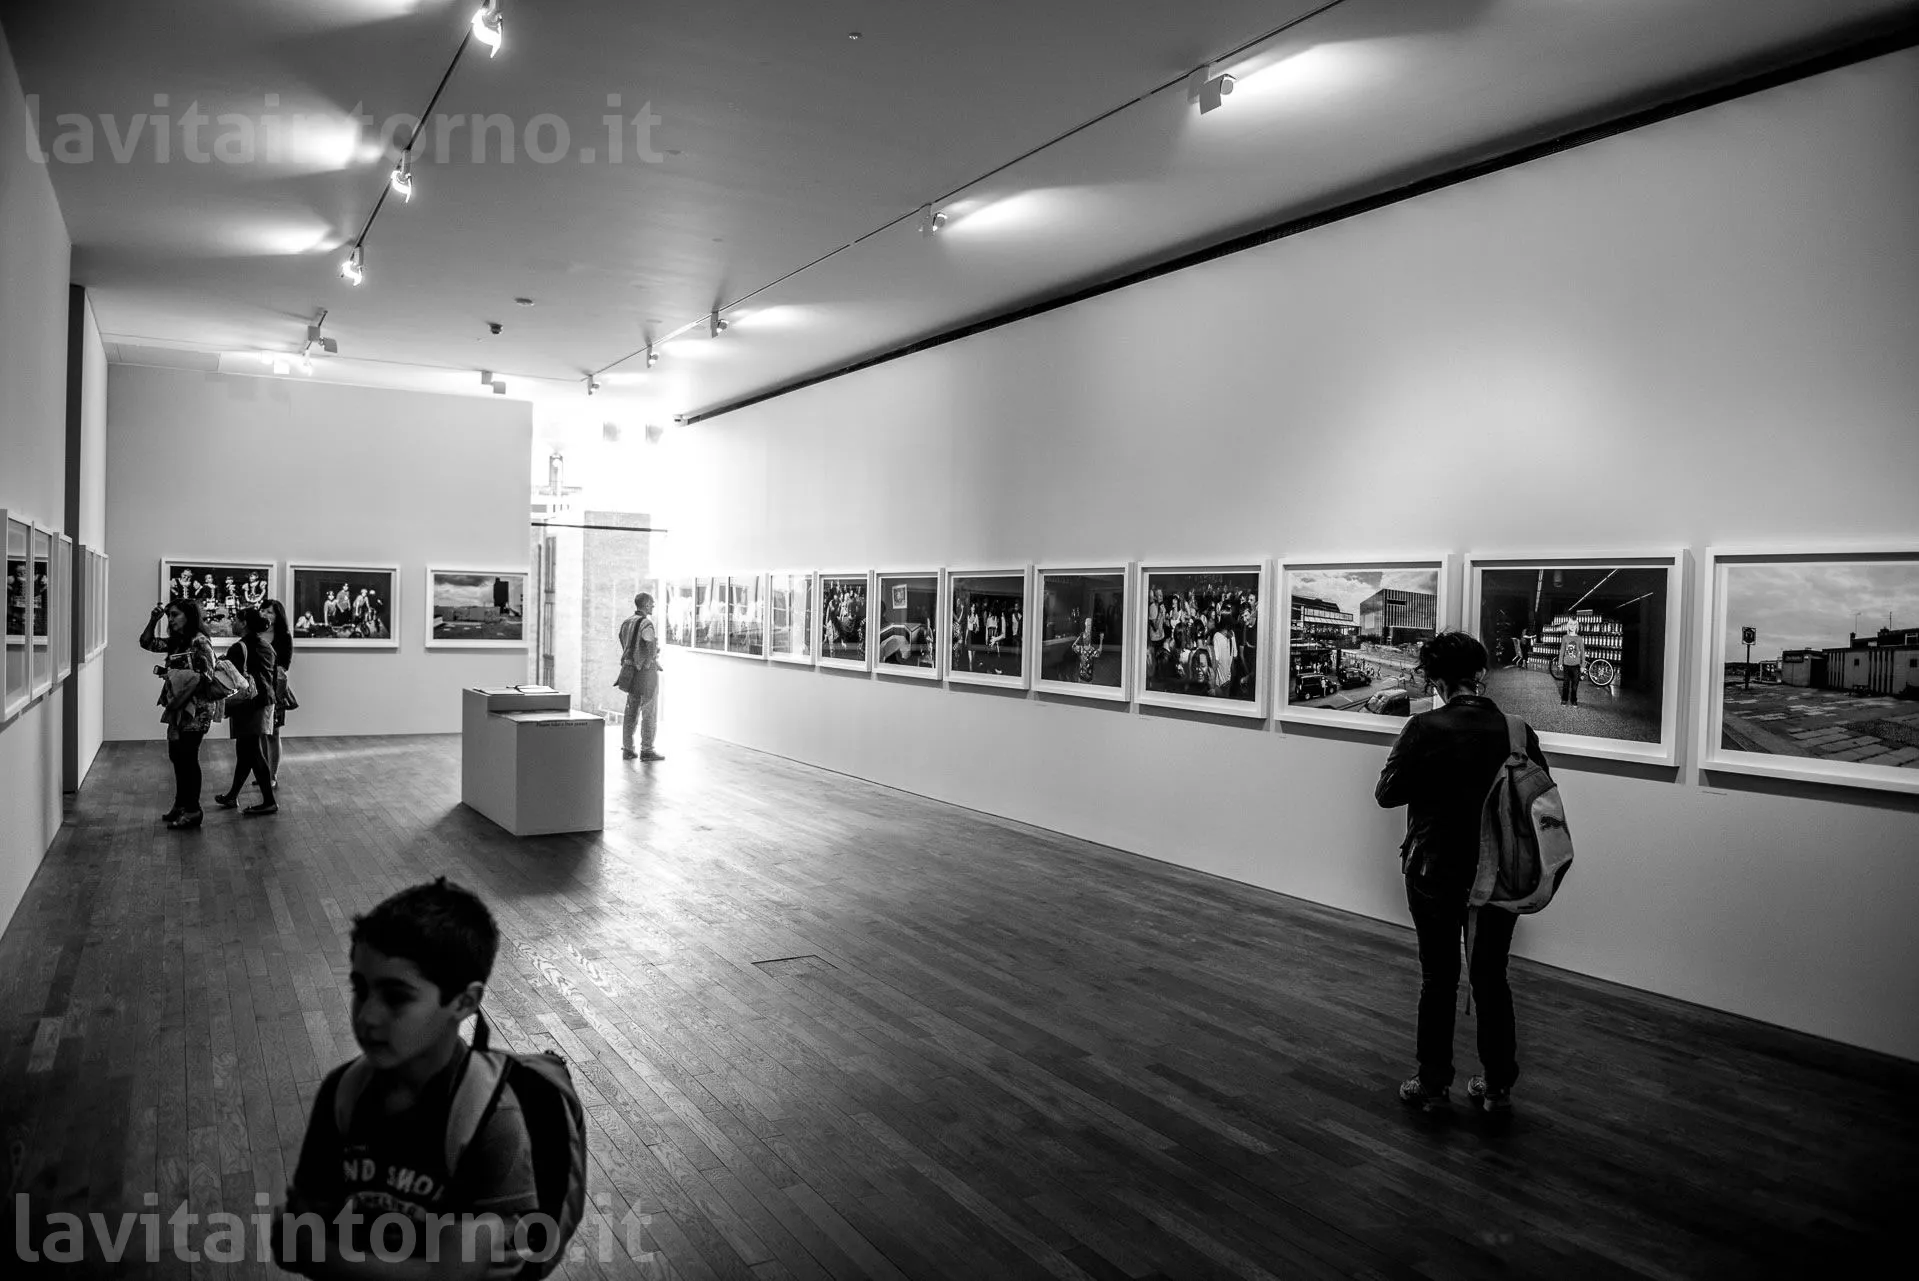 London - The Photographers Gallery
D800E
Nikkor 24-70 F/2.8G AF-S